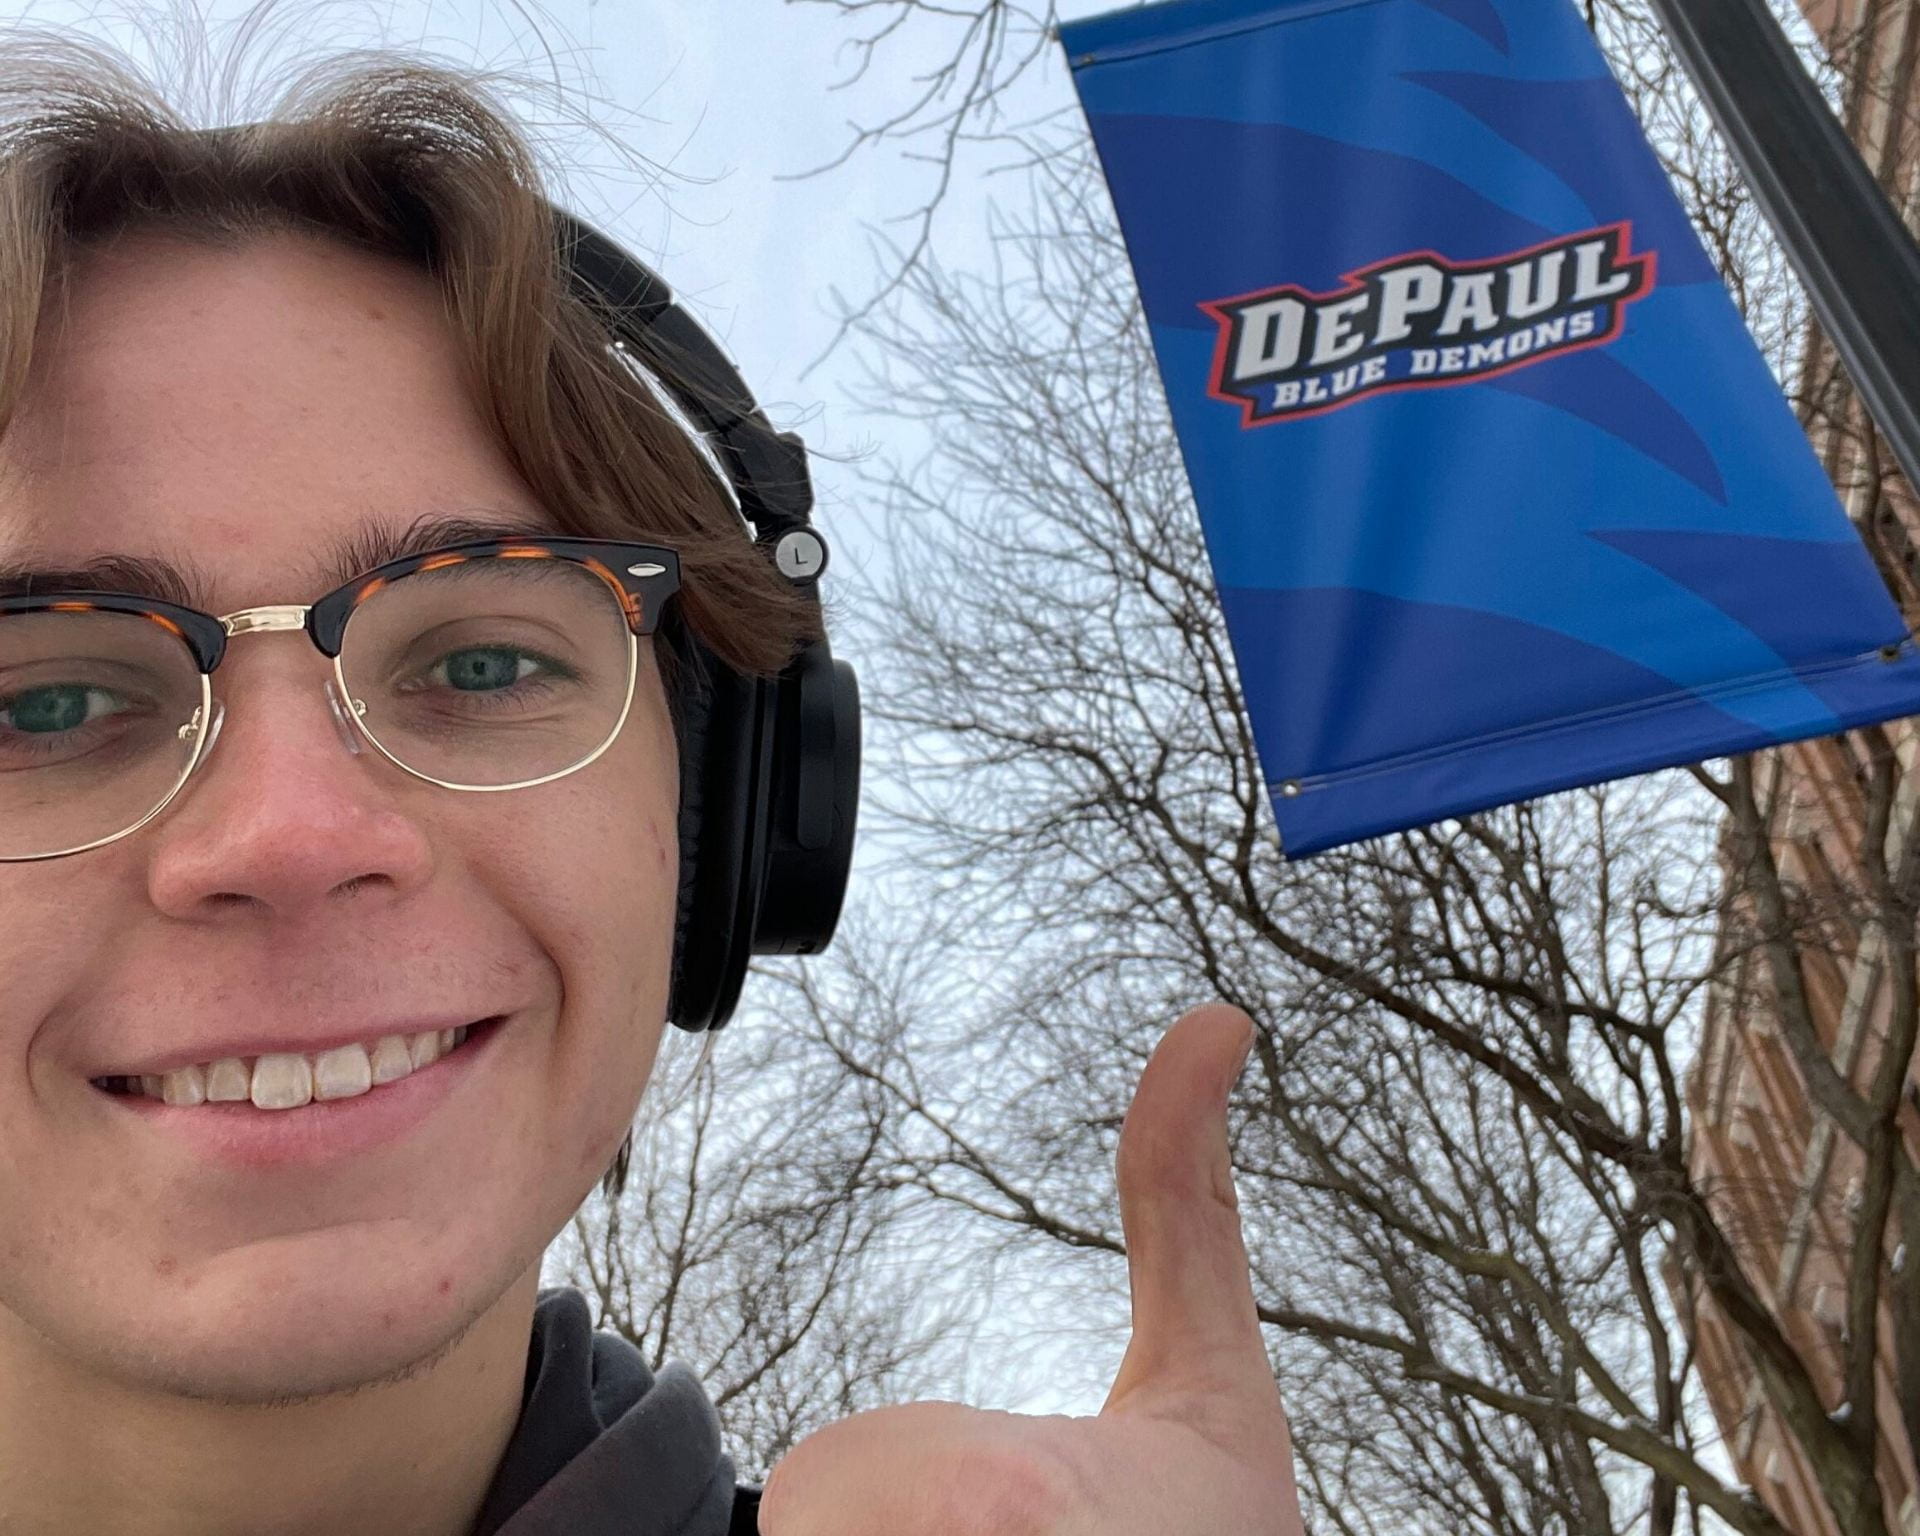 DePaul University student Jeff gives a thumbs up in front of a banner in the DePaul University quad.